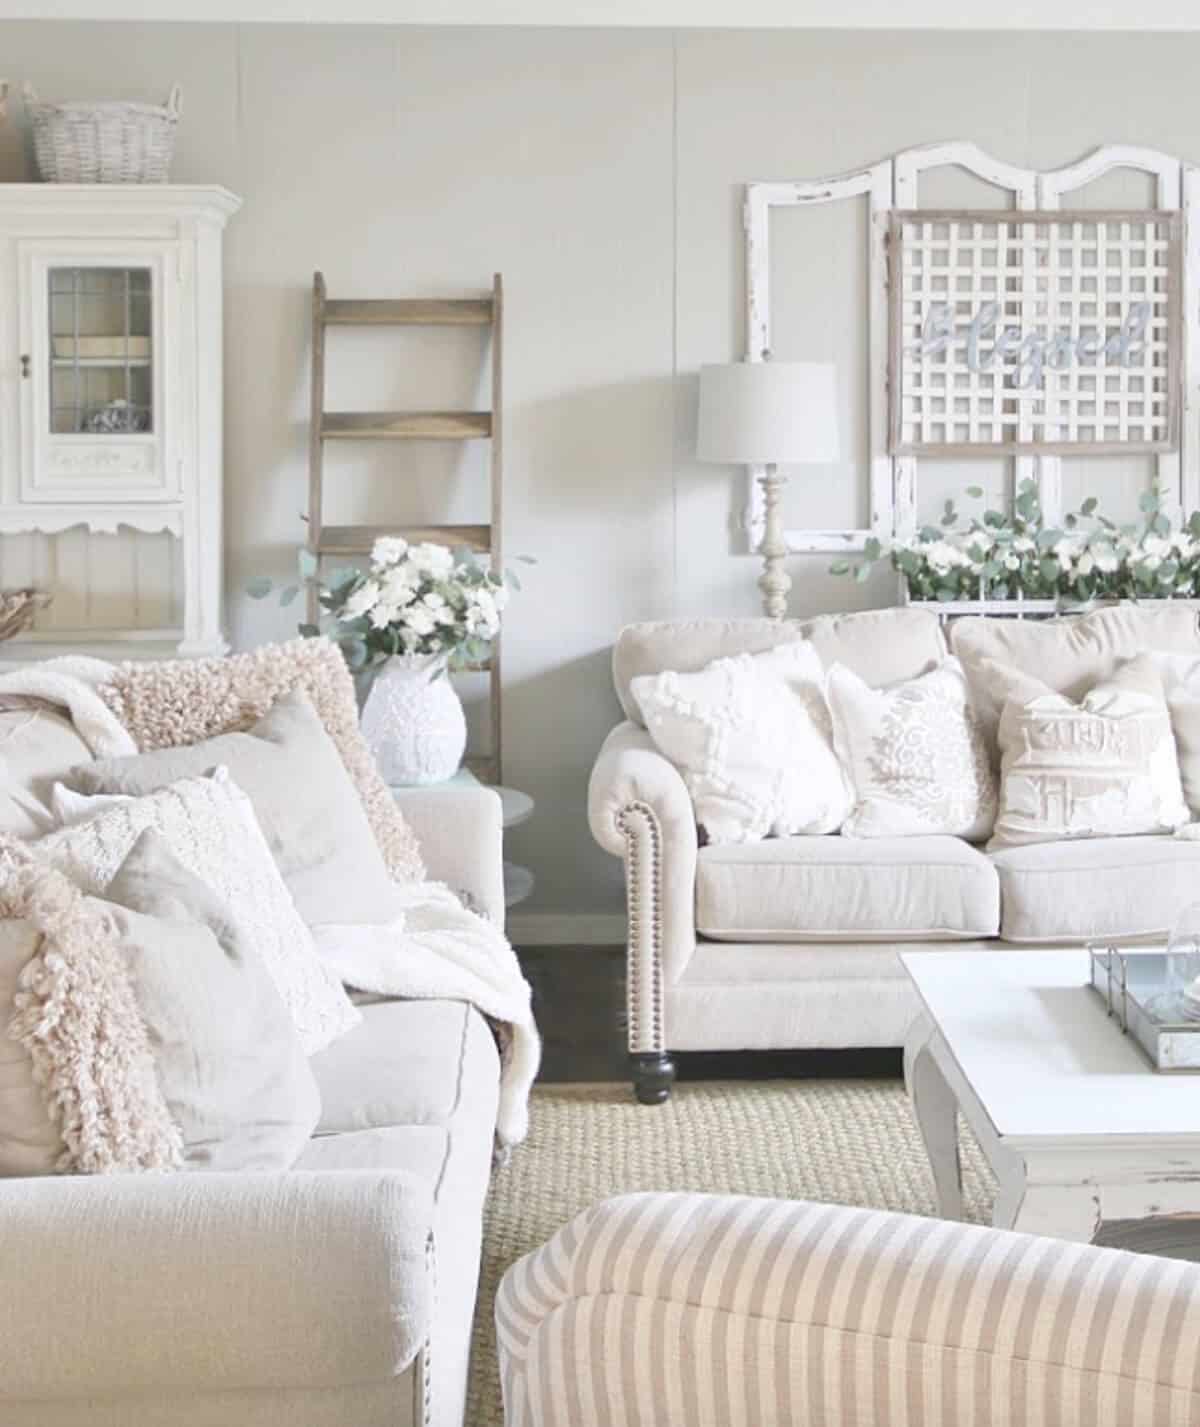 Mindful Gray greige paint color in living room